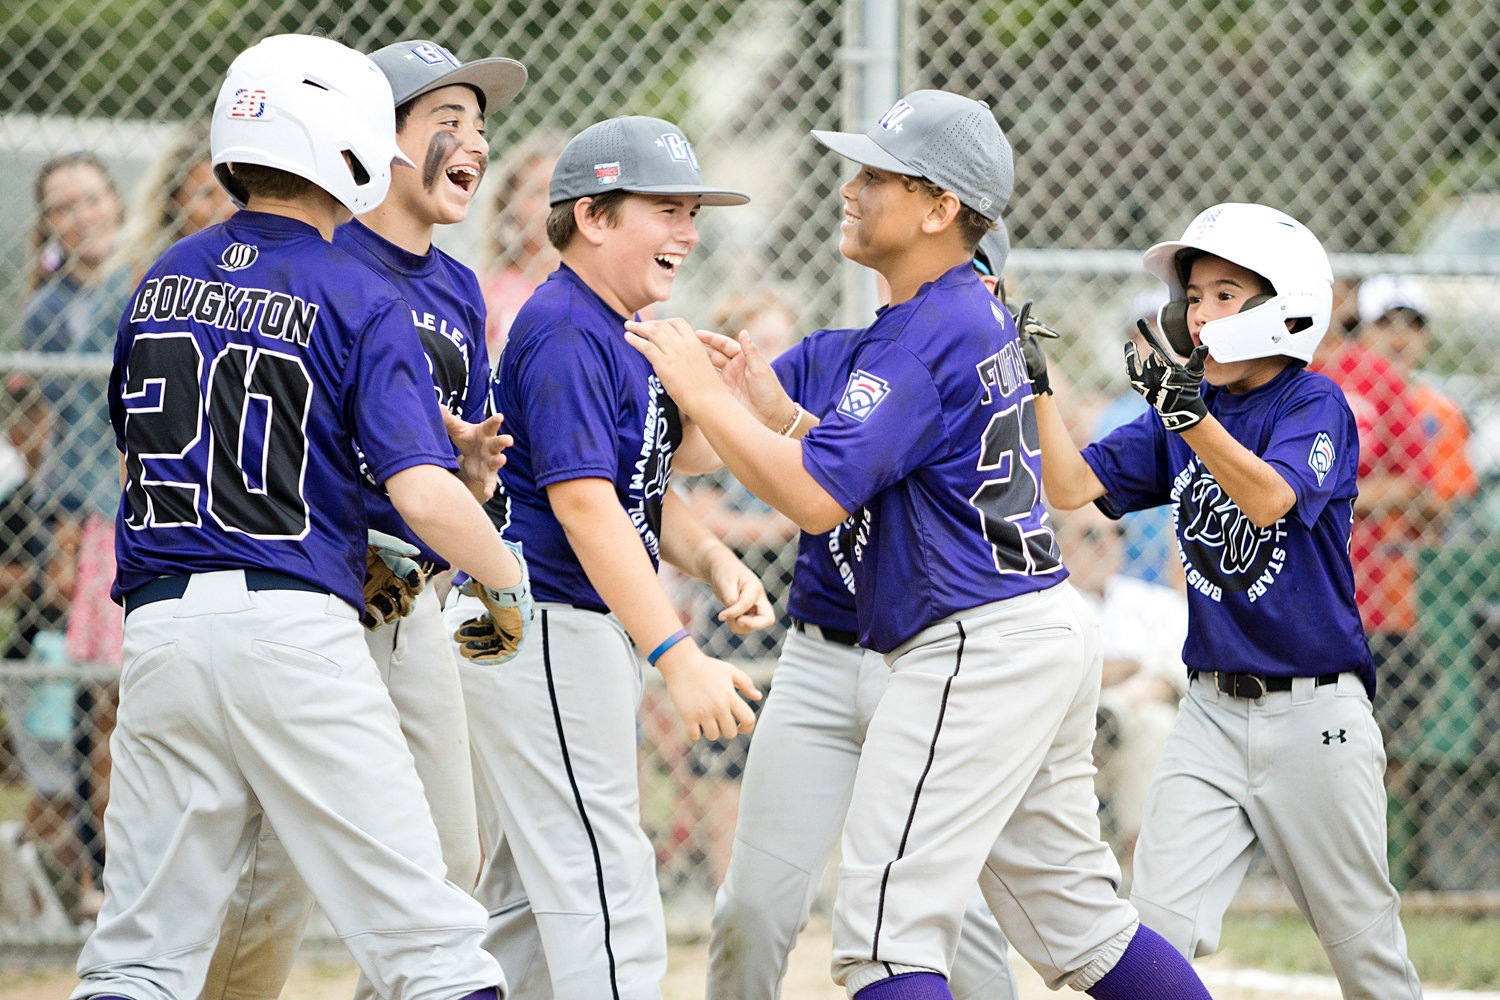 The Bristol Warren All-Stars celebrate a homerun hit by Blake Boughton in the sixth inning of the District 2 finals, Saturday.